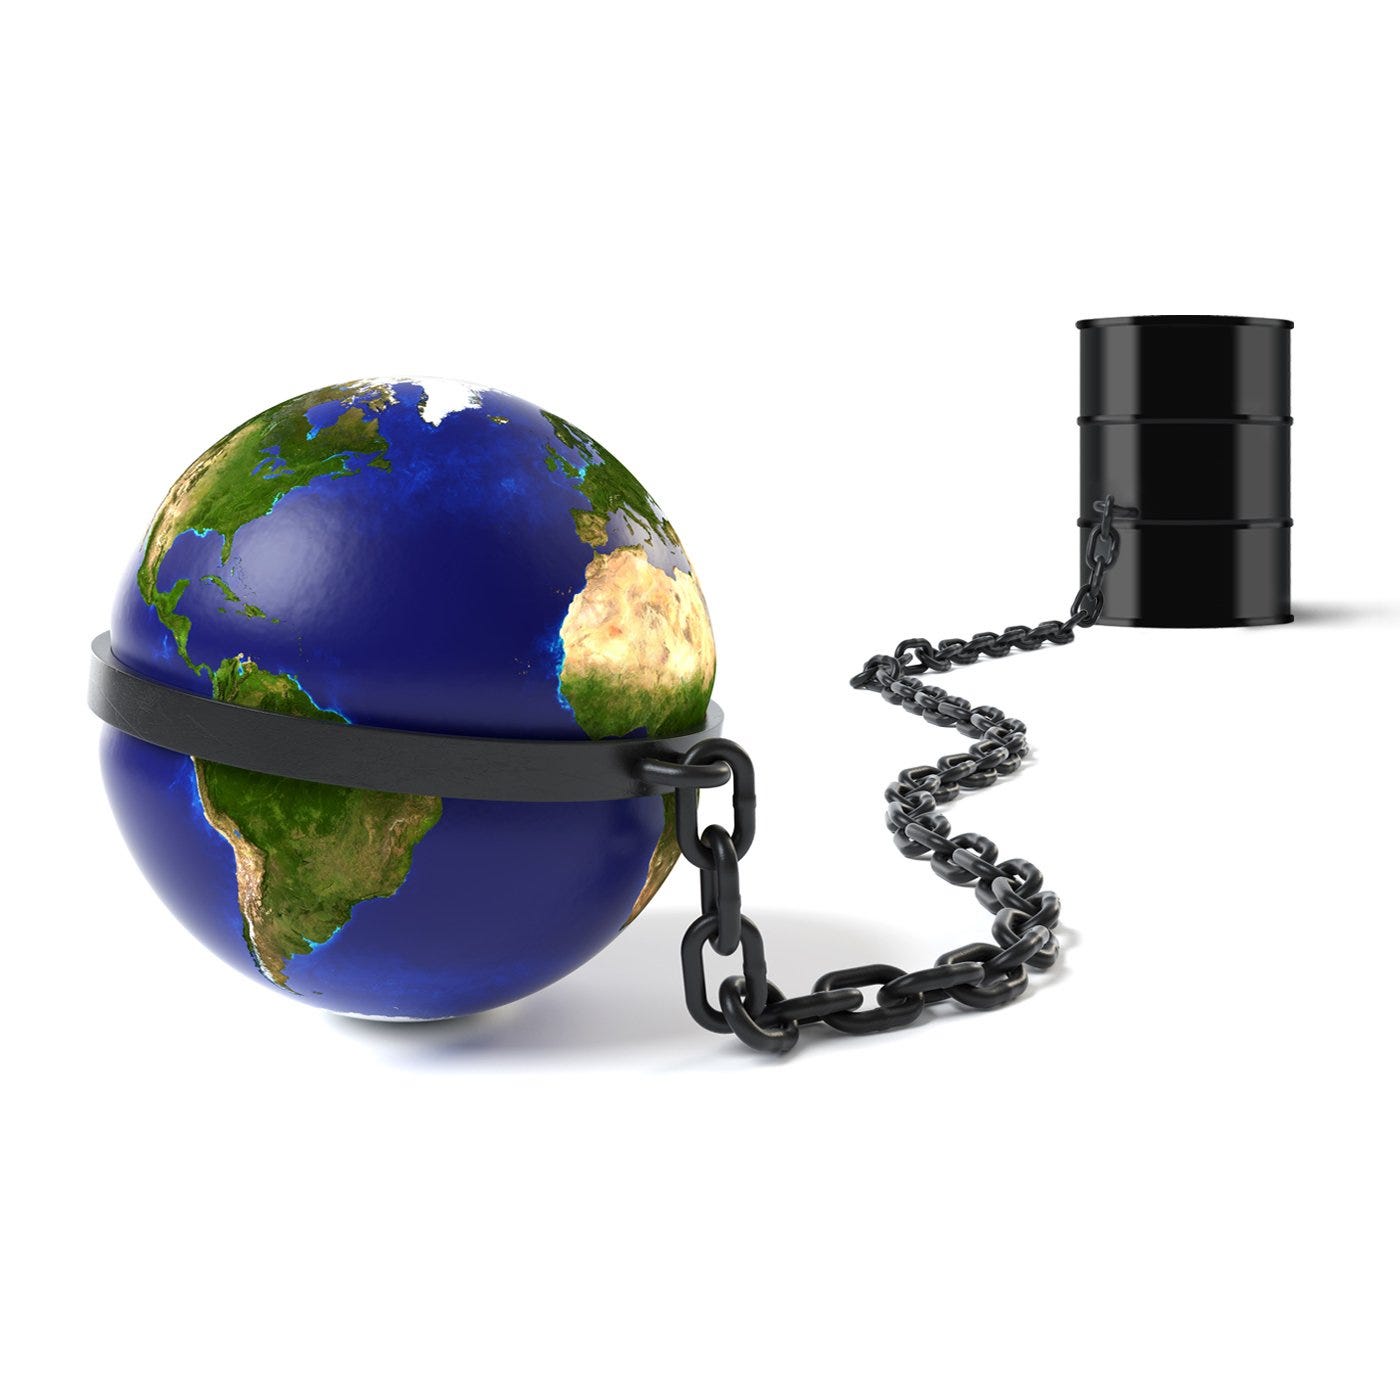 An Earth globe with a leg-shackle around the equator, chained to a barrel of oil.